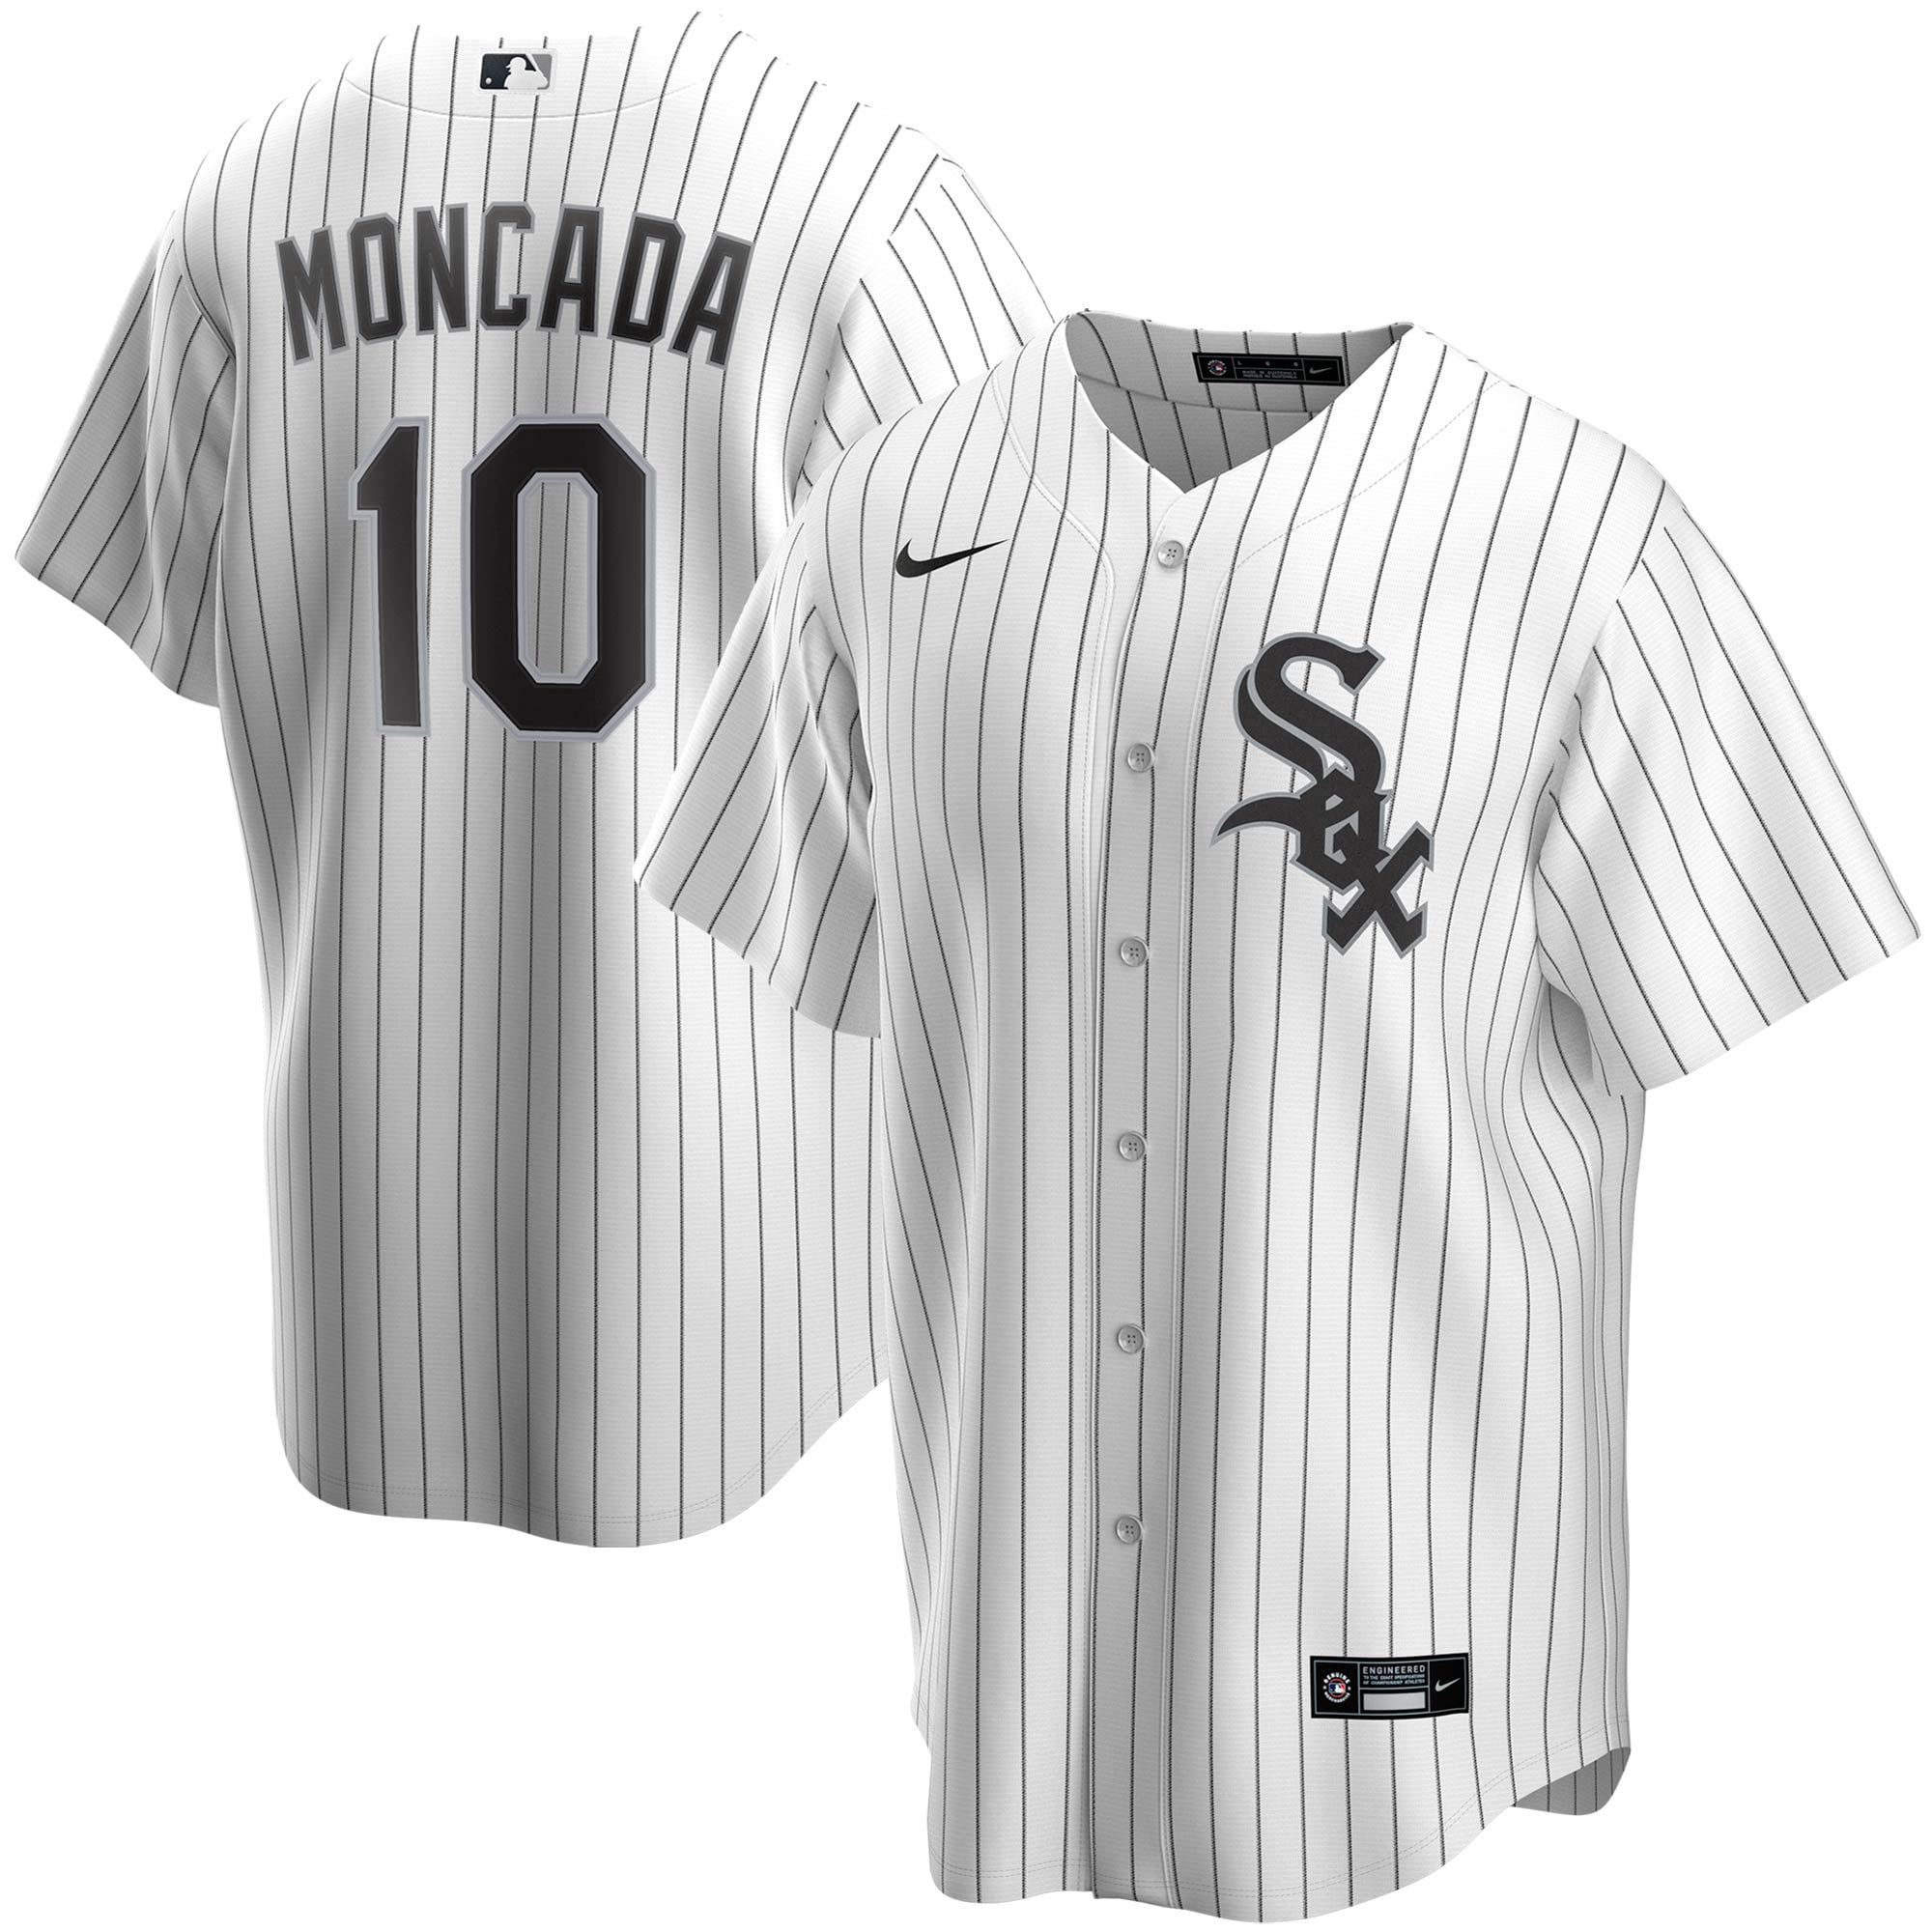 white sox youth jersey